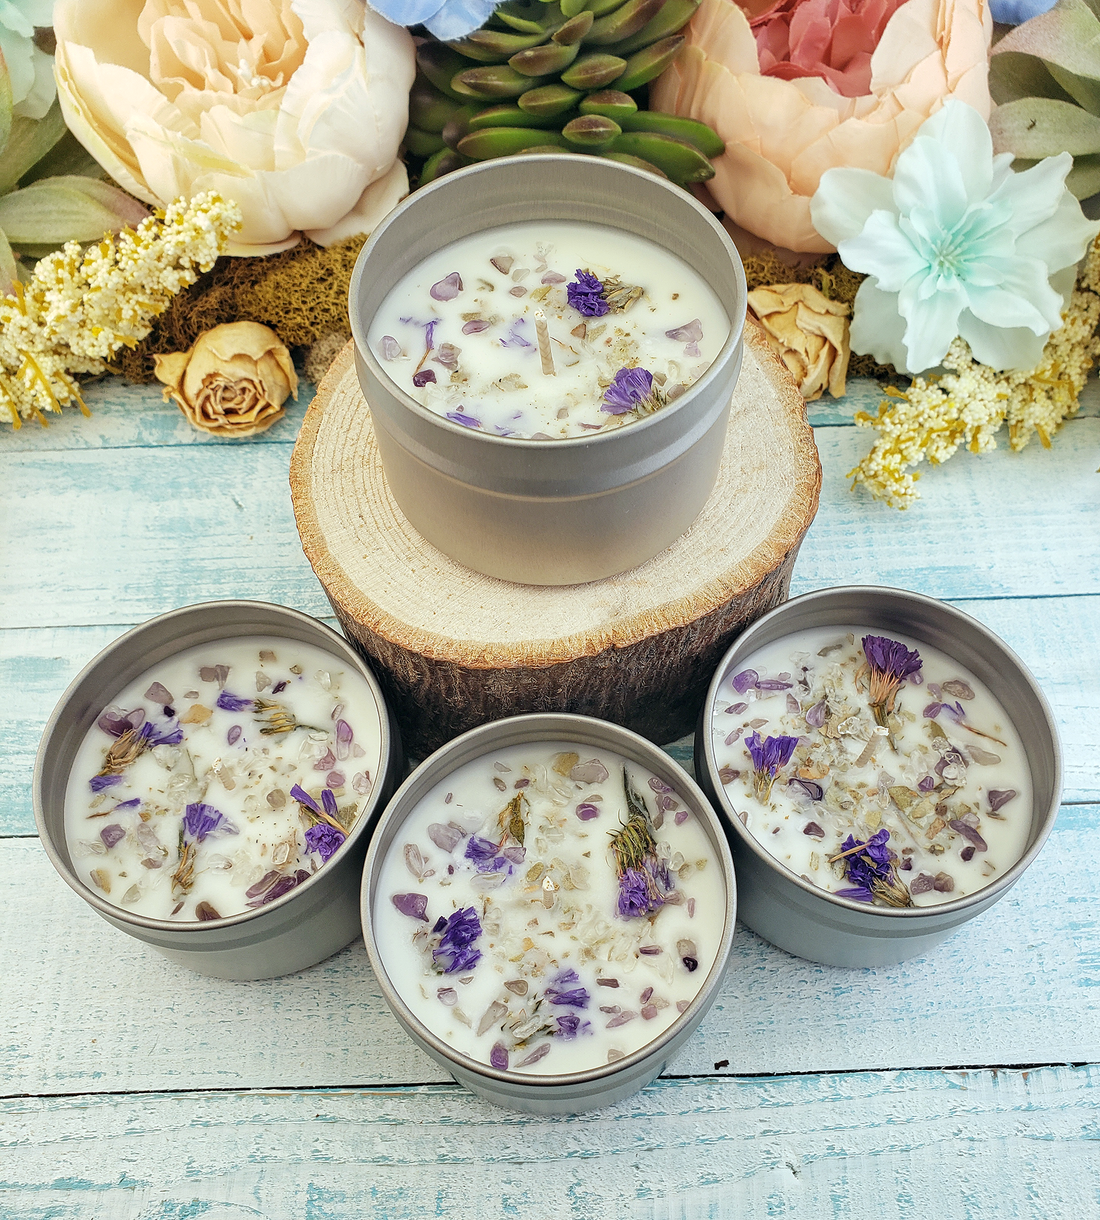 Coconut Soy Wax Handmade Scented Candle & Crystal Chips - Forget Me Not - Group Photo